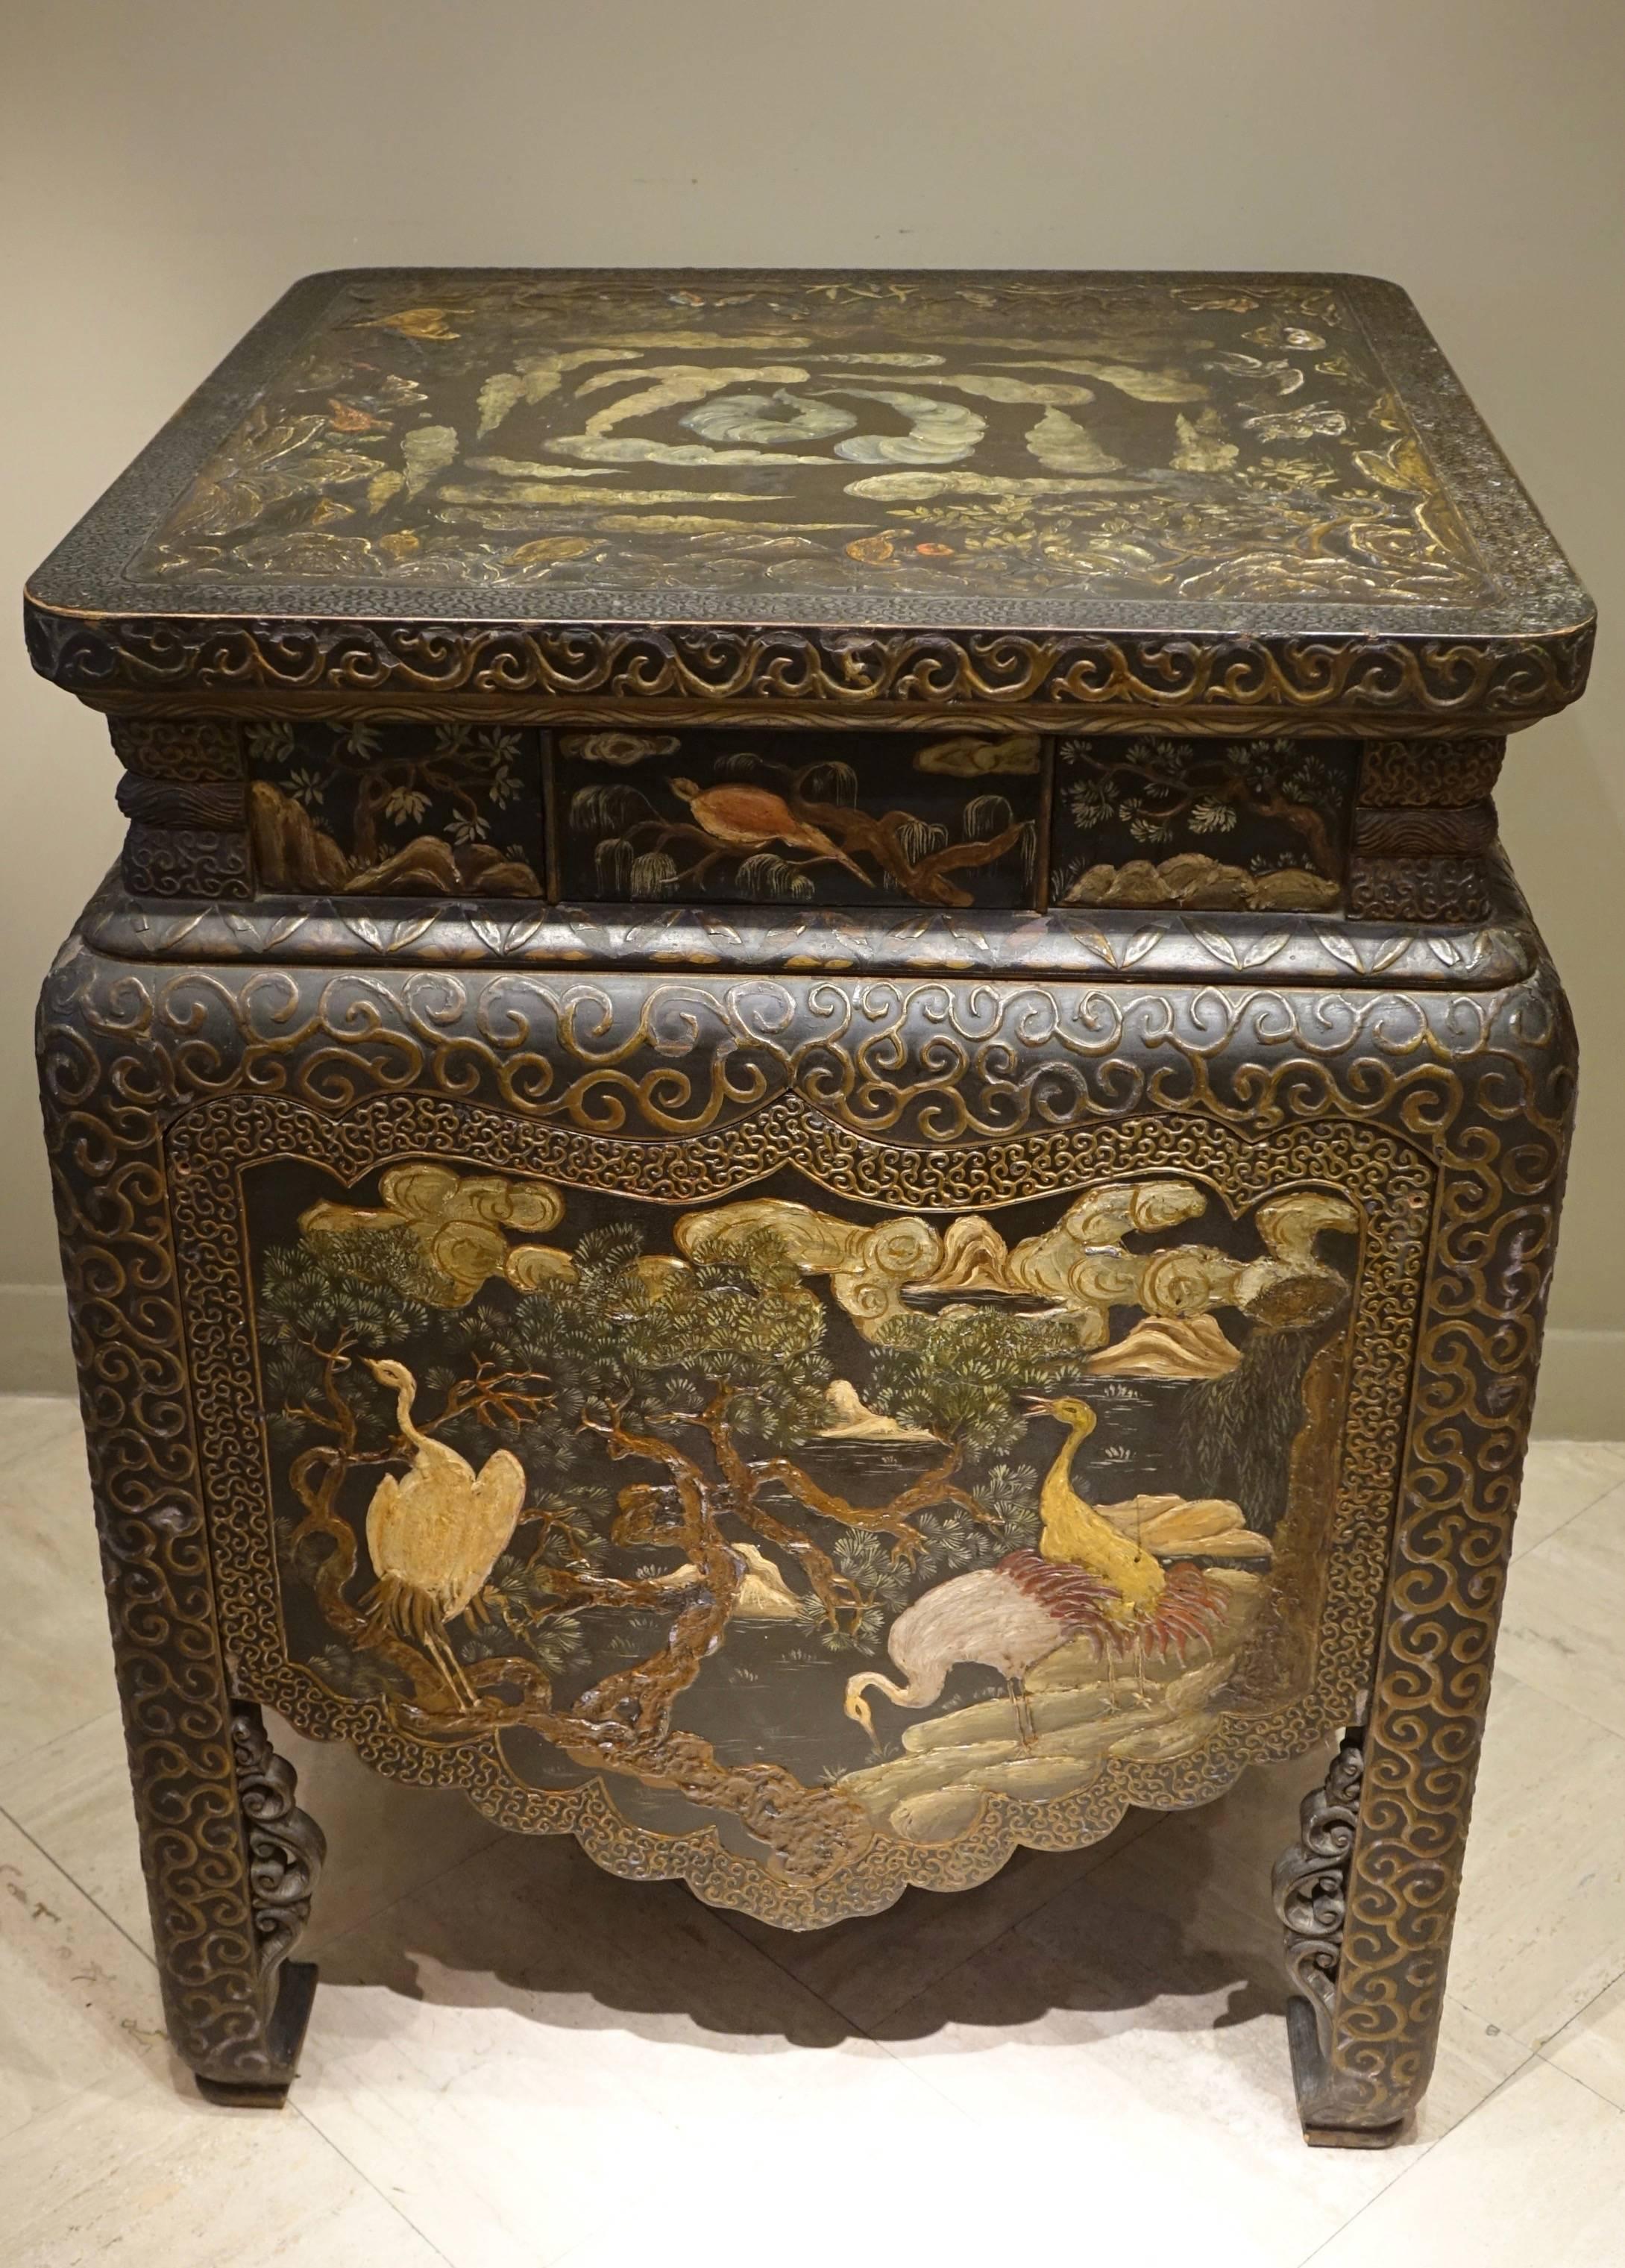 Unusual Chinese lacquer storage table for prints, circa 1920.